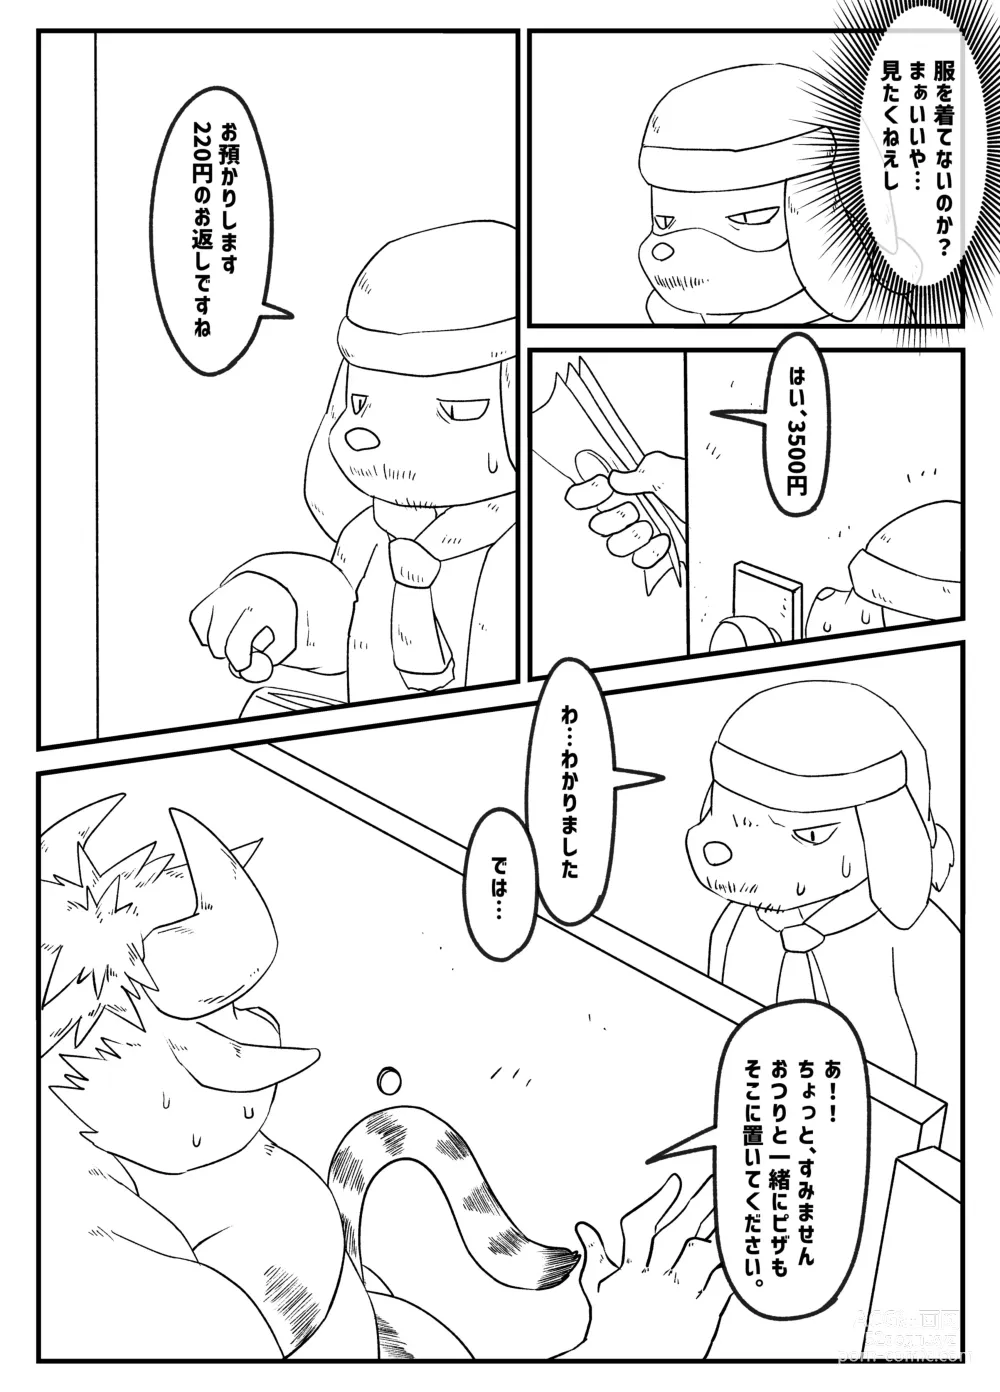 Page 9 of doujinshi Muscular Bull Teacher & Chubby Tiger Student 5